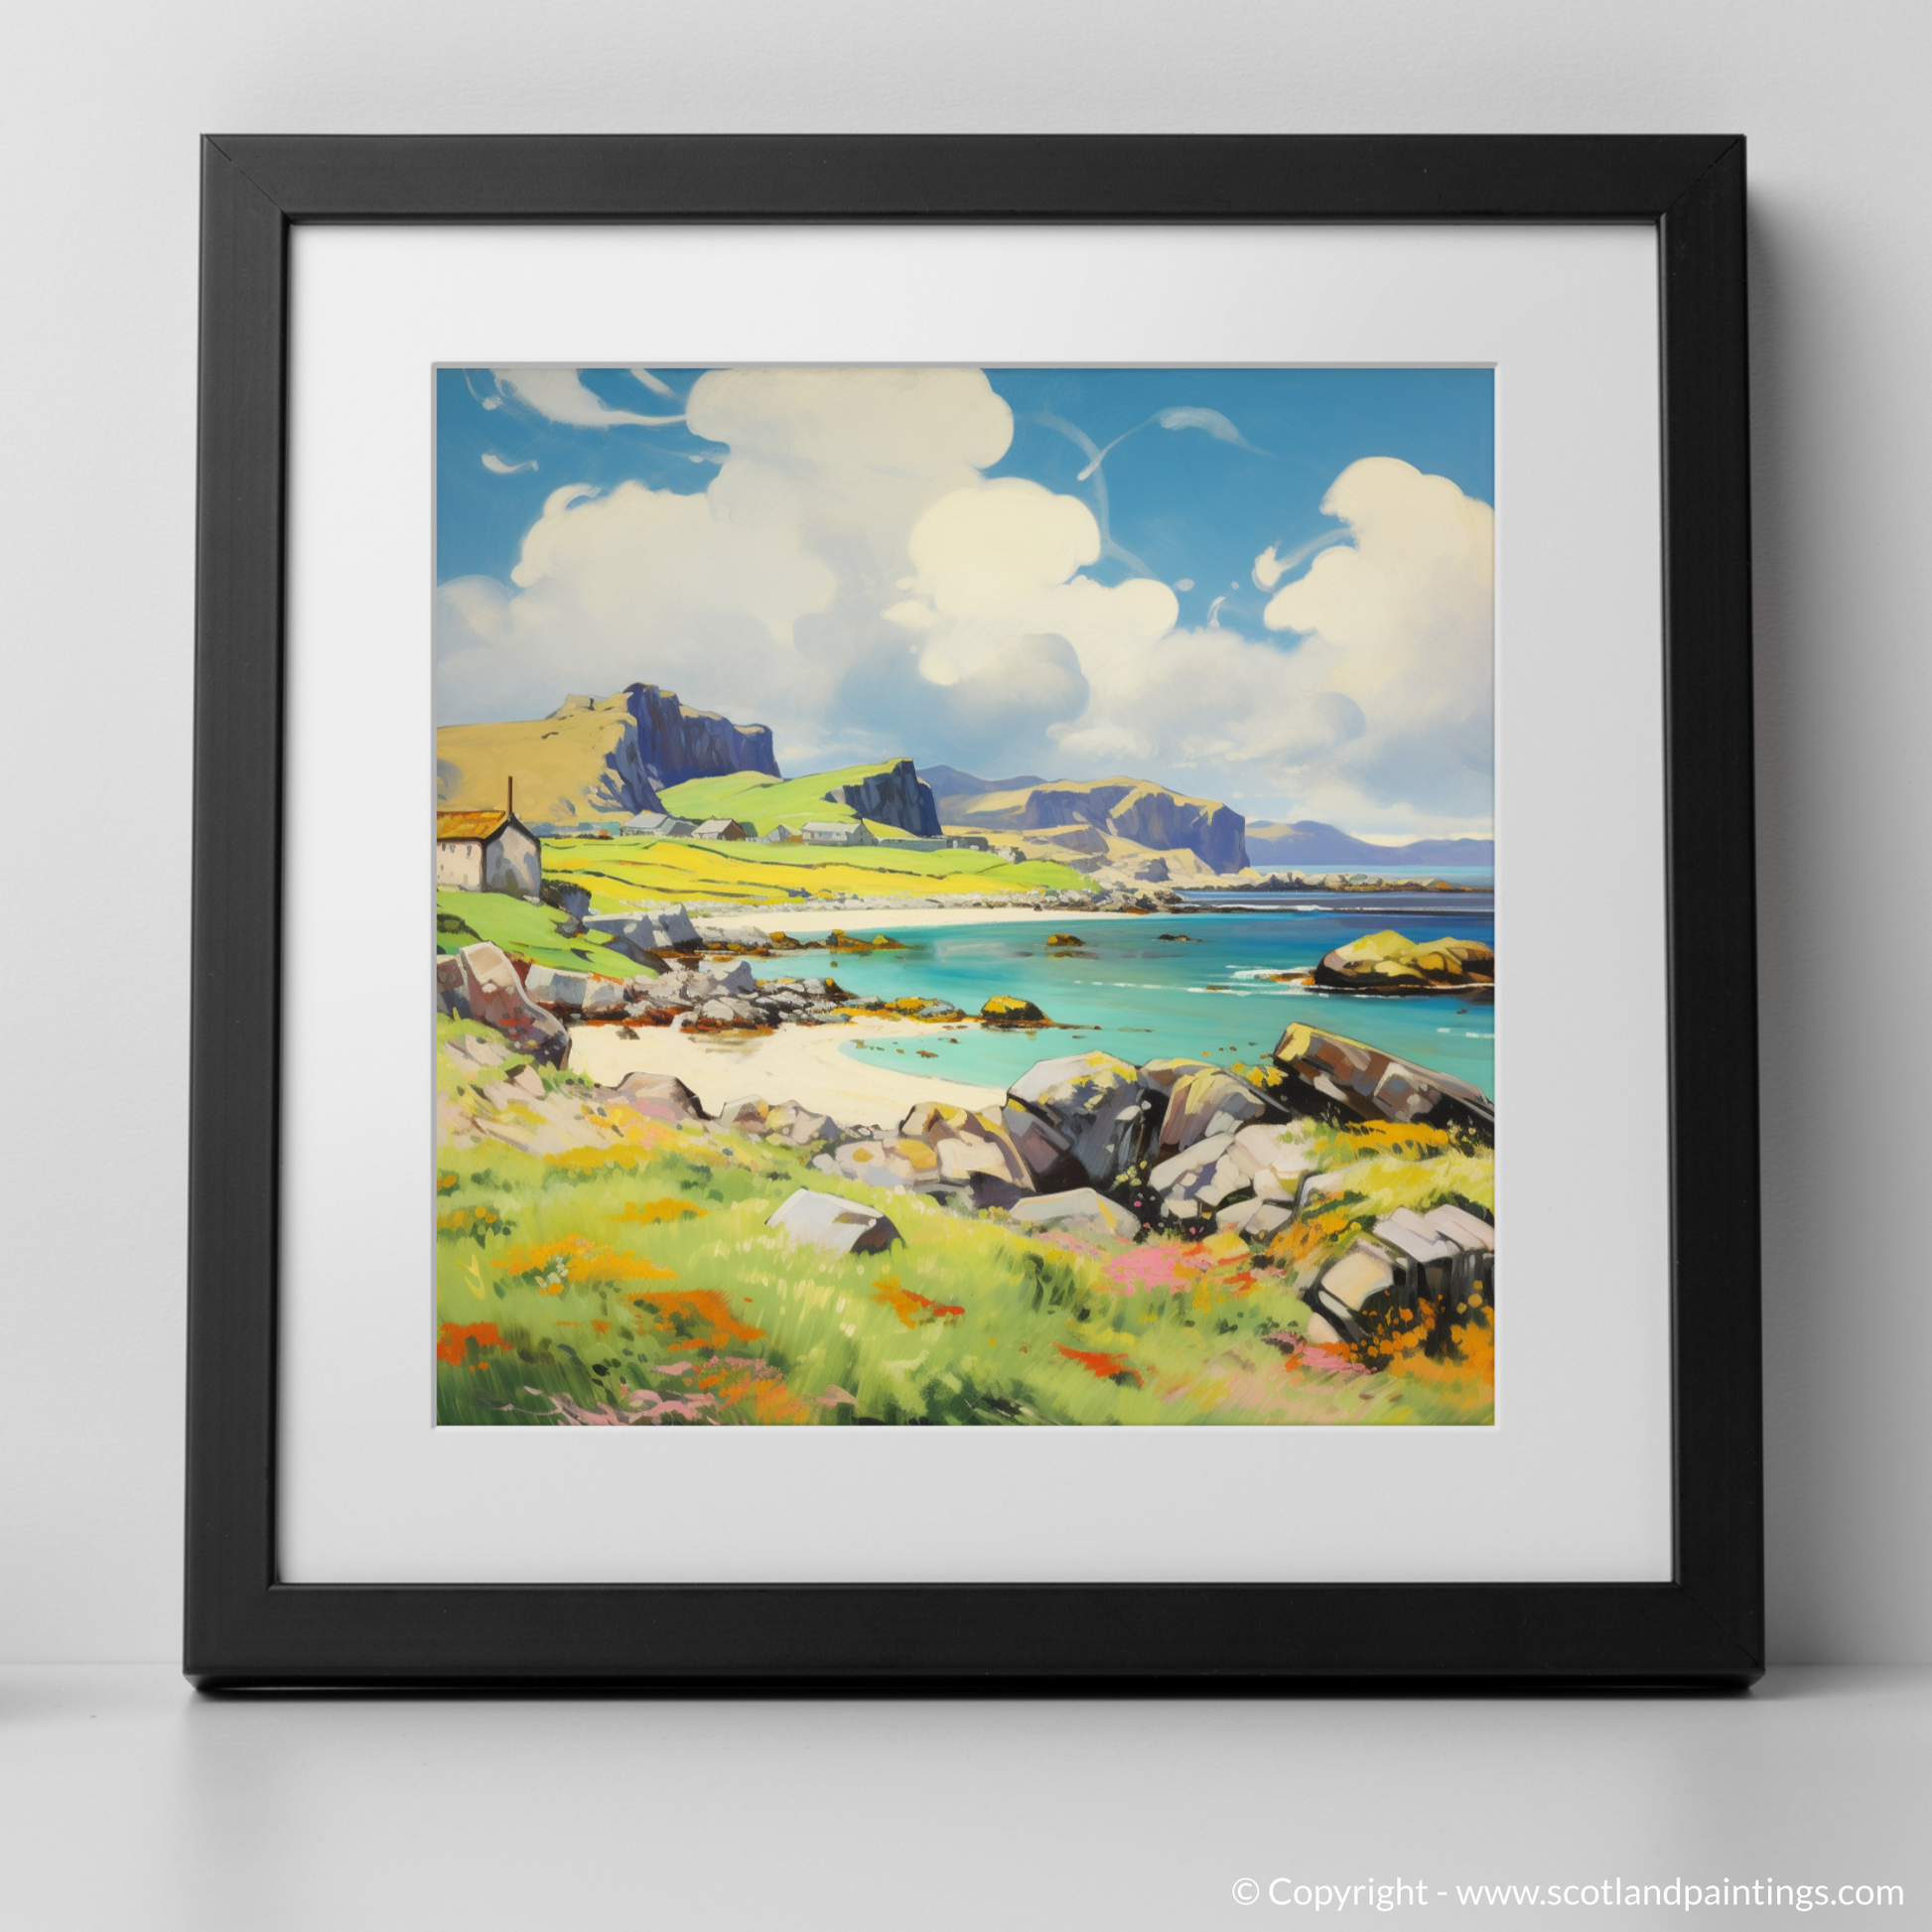 Art Print of Isle of Mull, Inner Hebrides in summer with a black frame